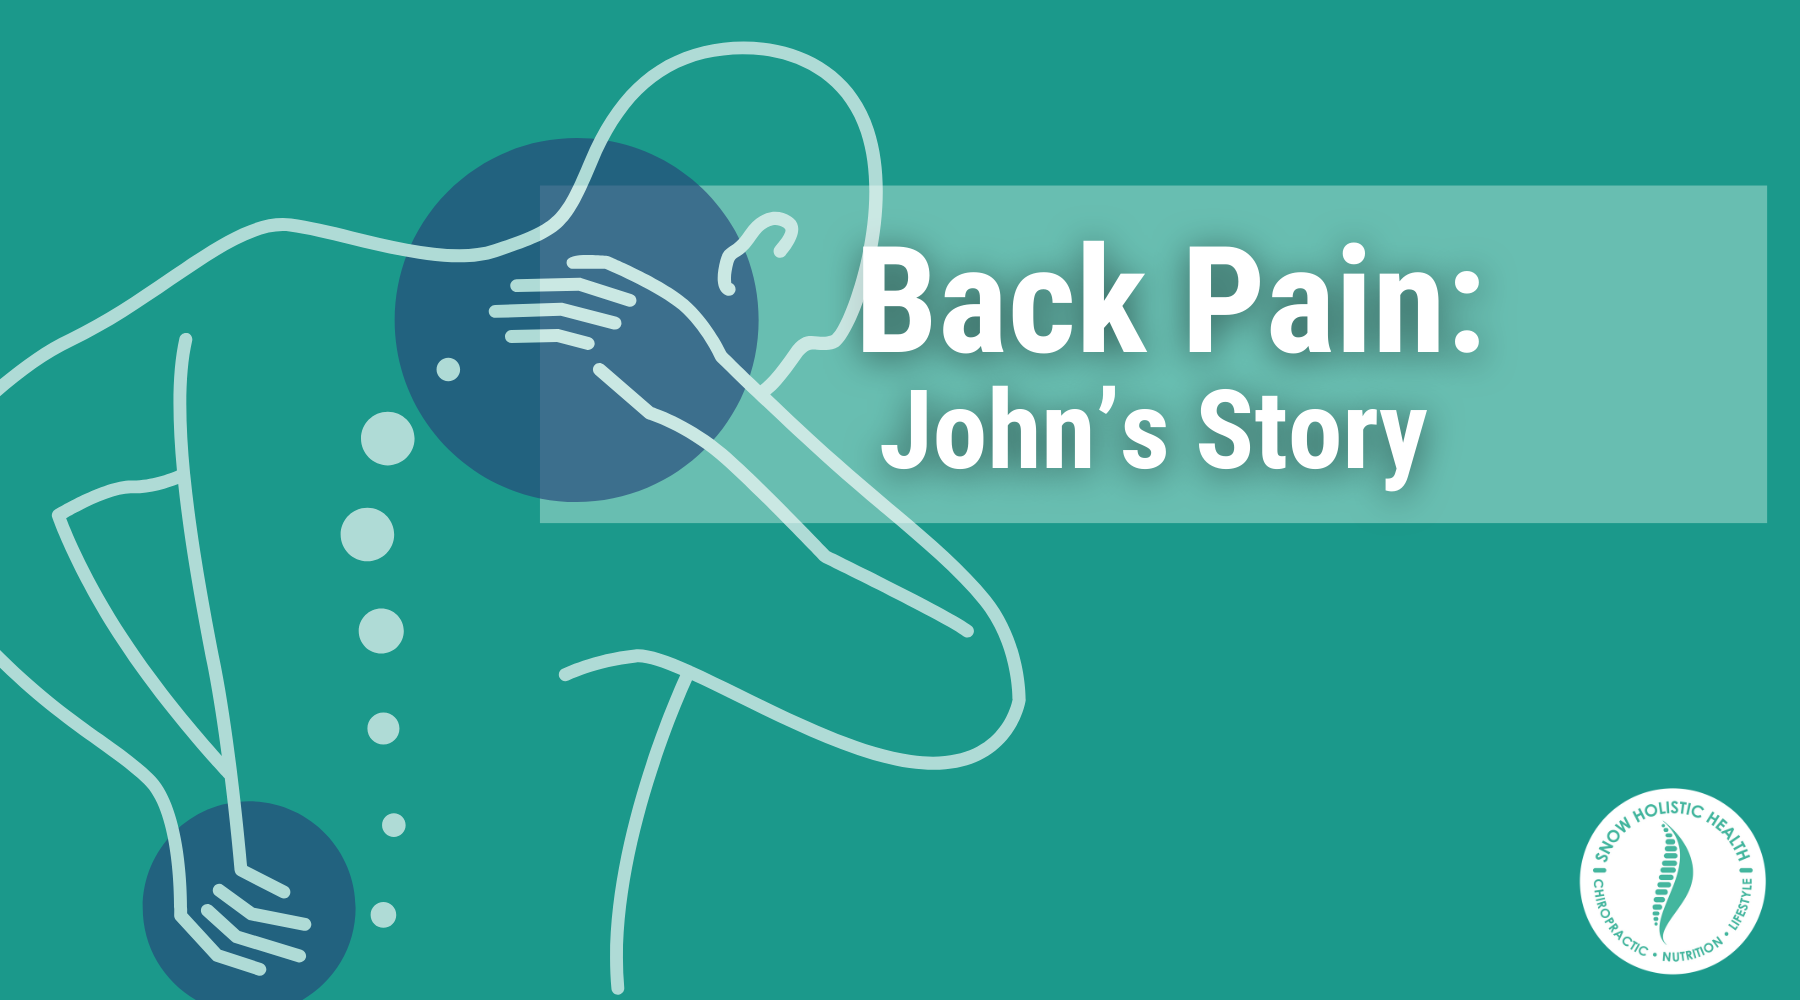 Image of cartoon man clutching painful back with caption: "Back Pain: John's Story"